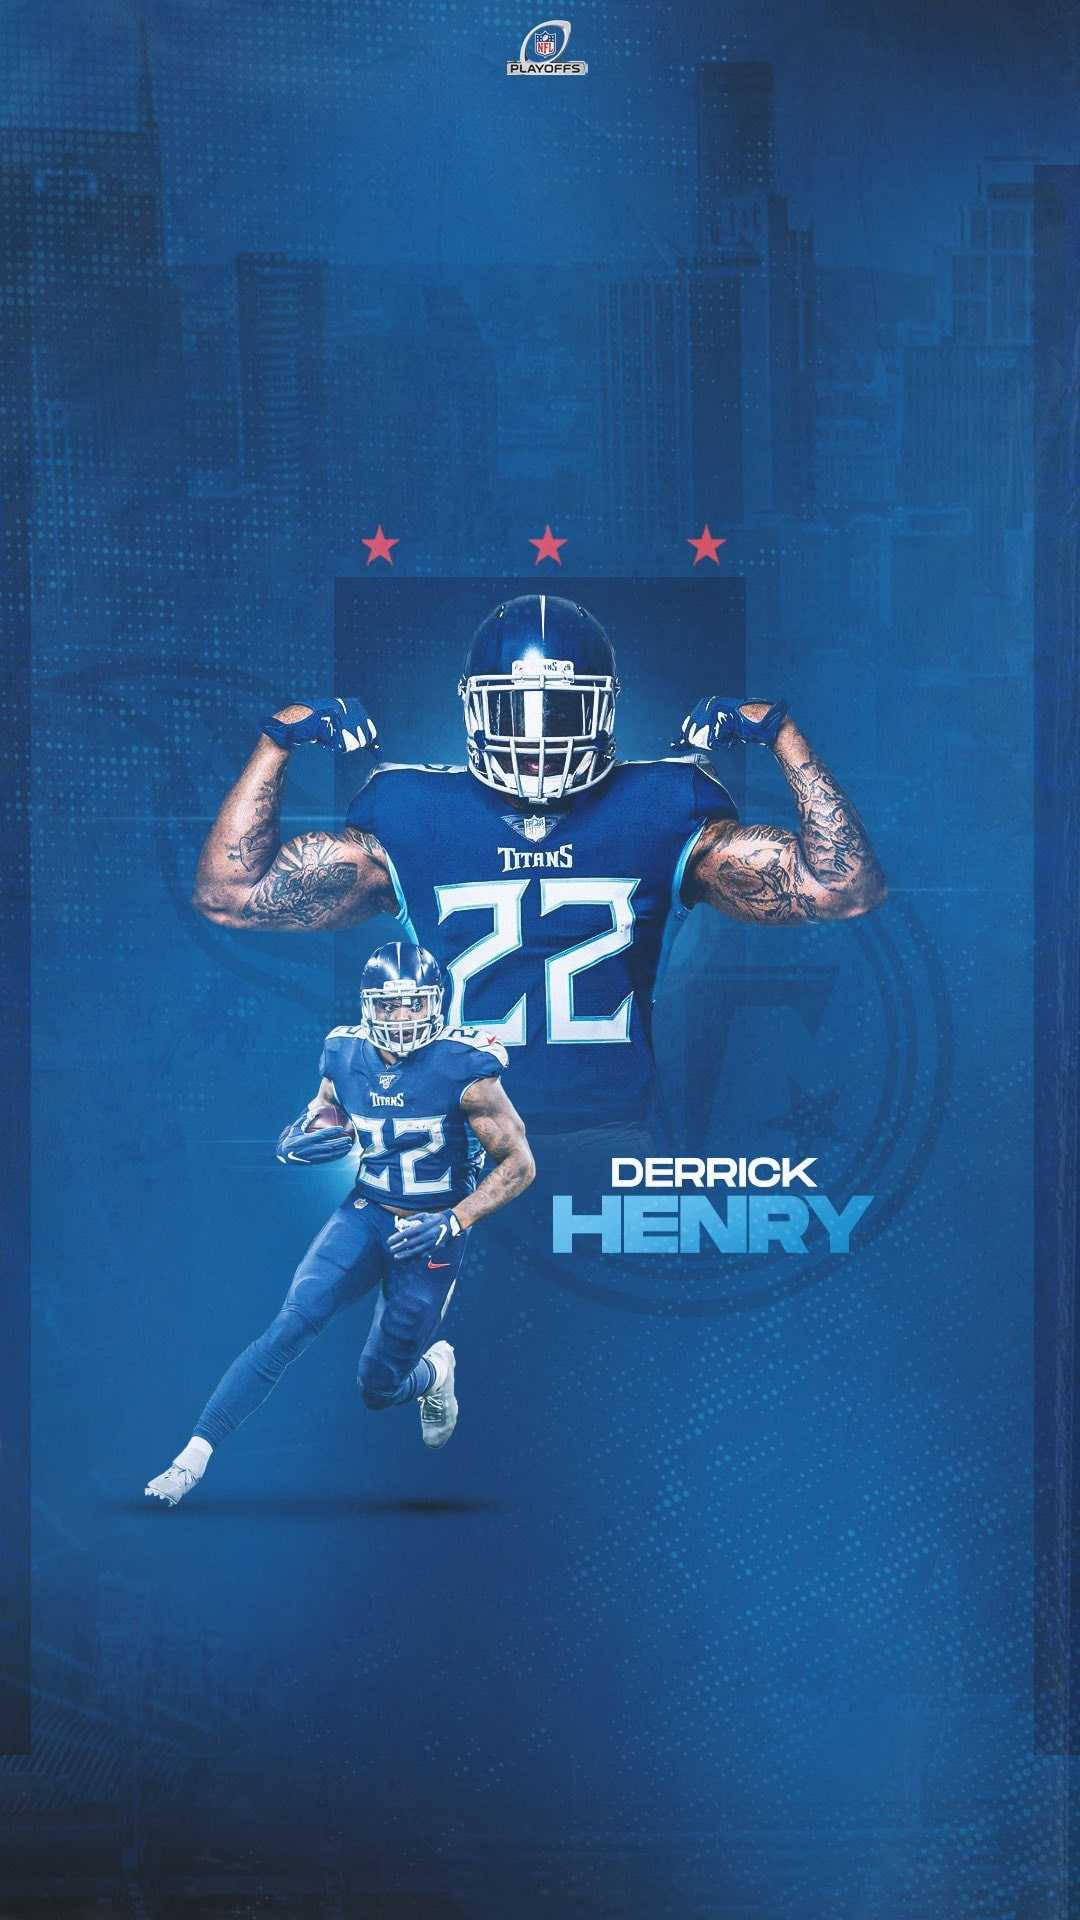 Professional Football Player Derrick Henry Background